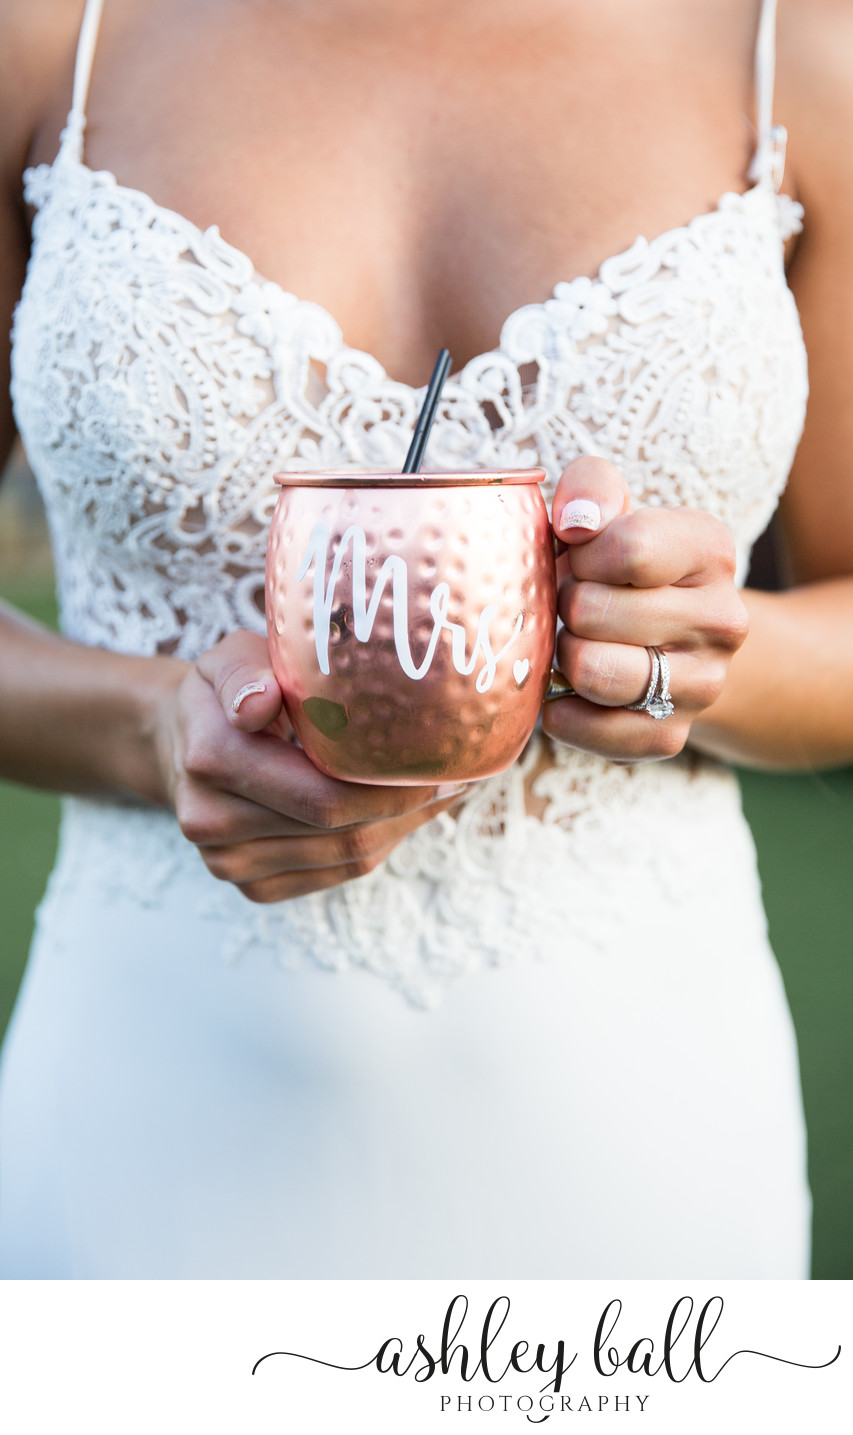 Mrs. Moscow Mule Photograph